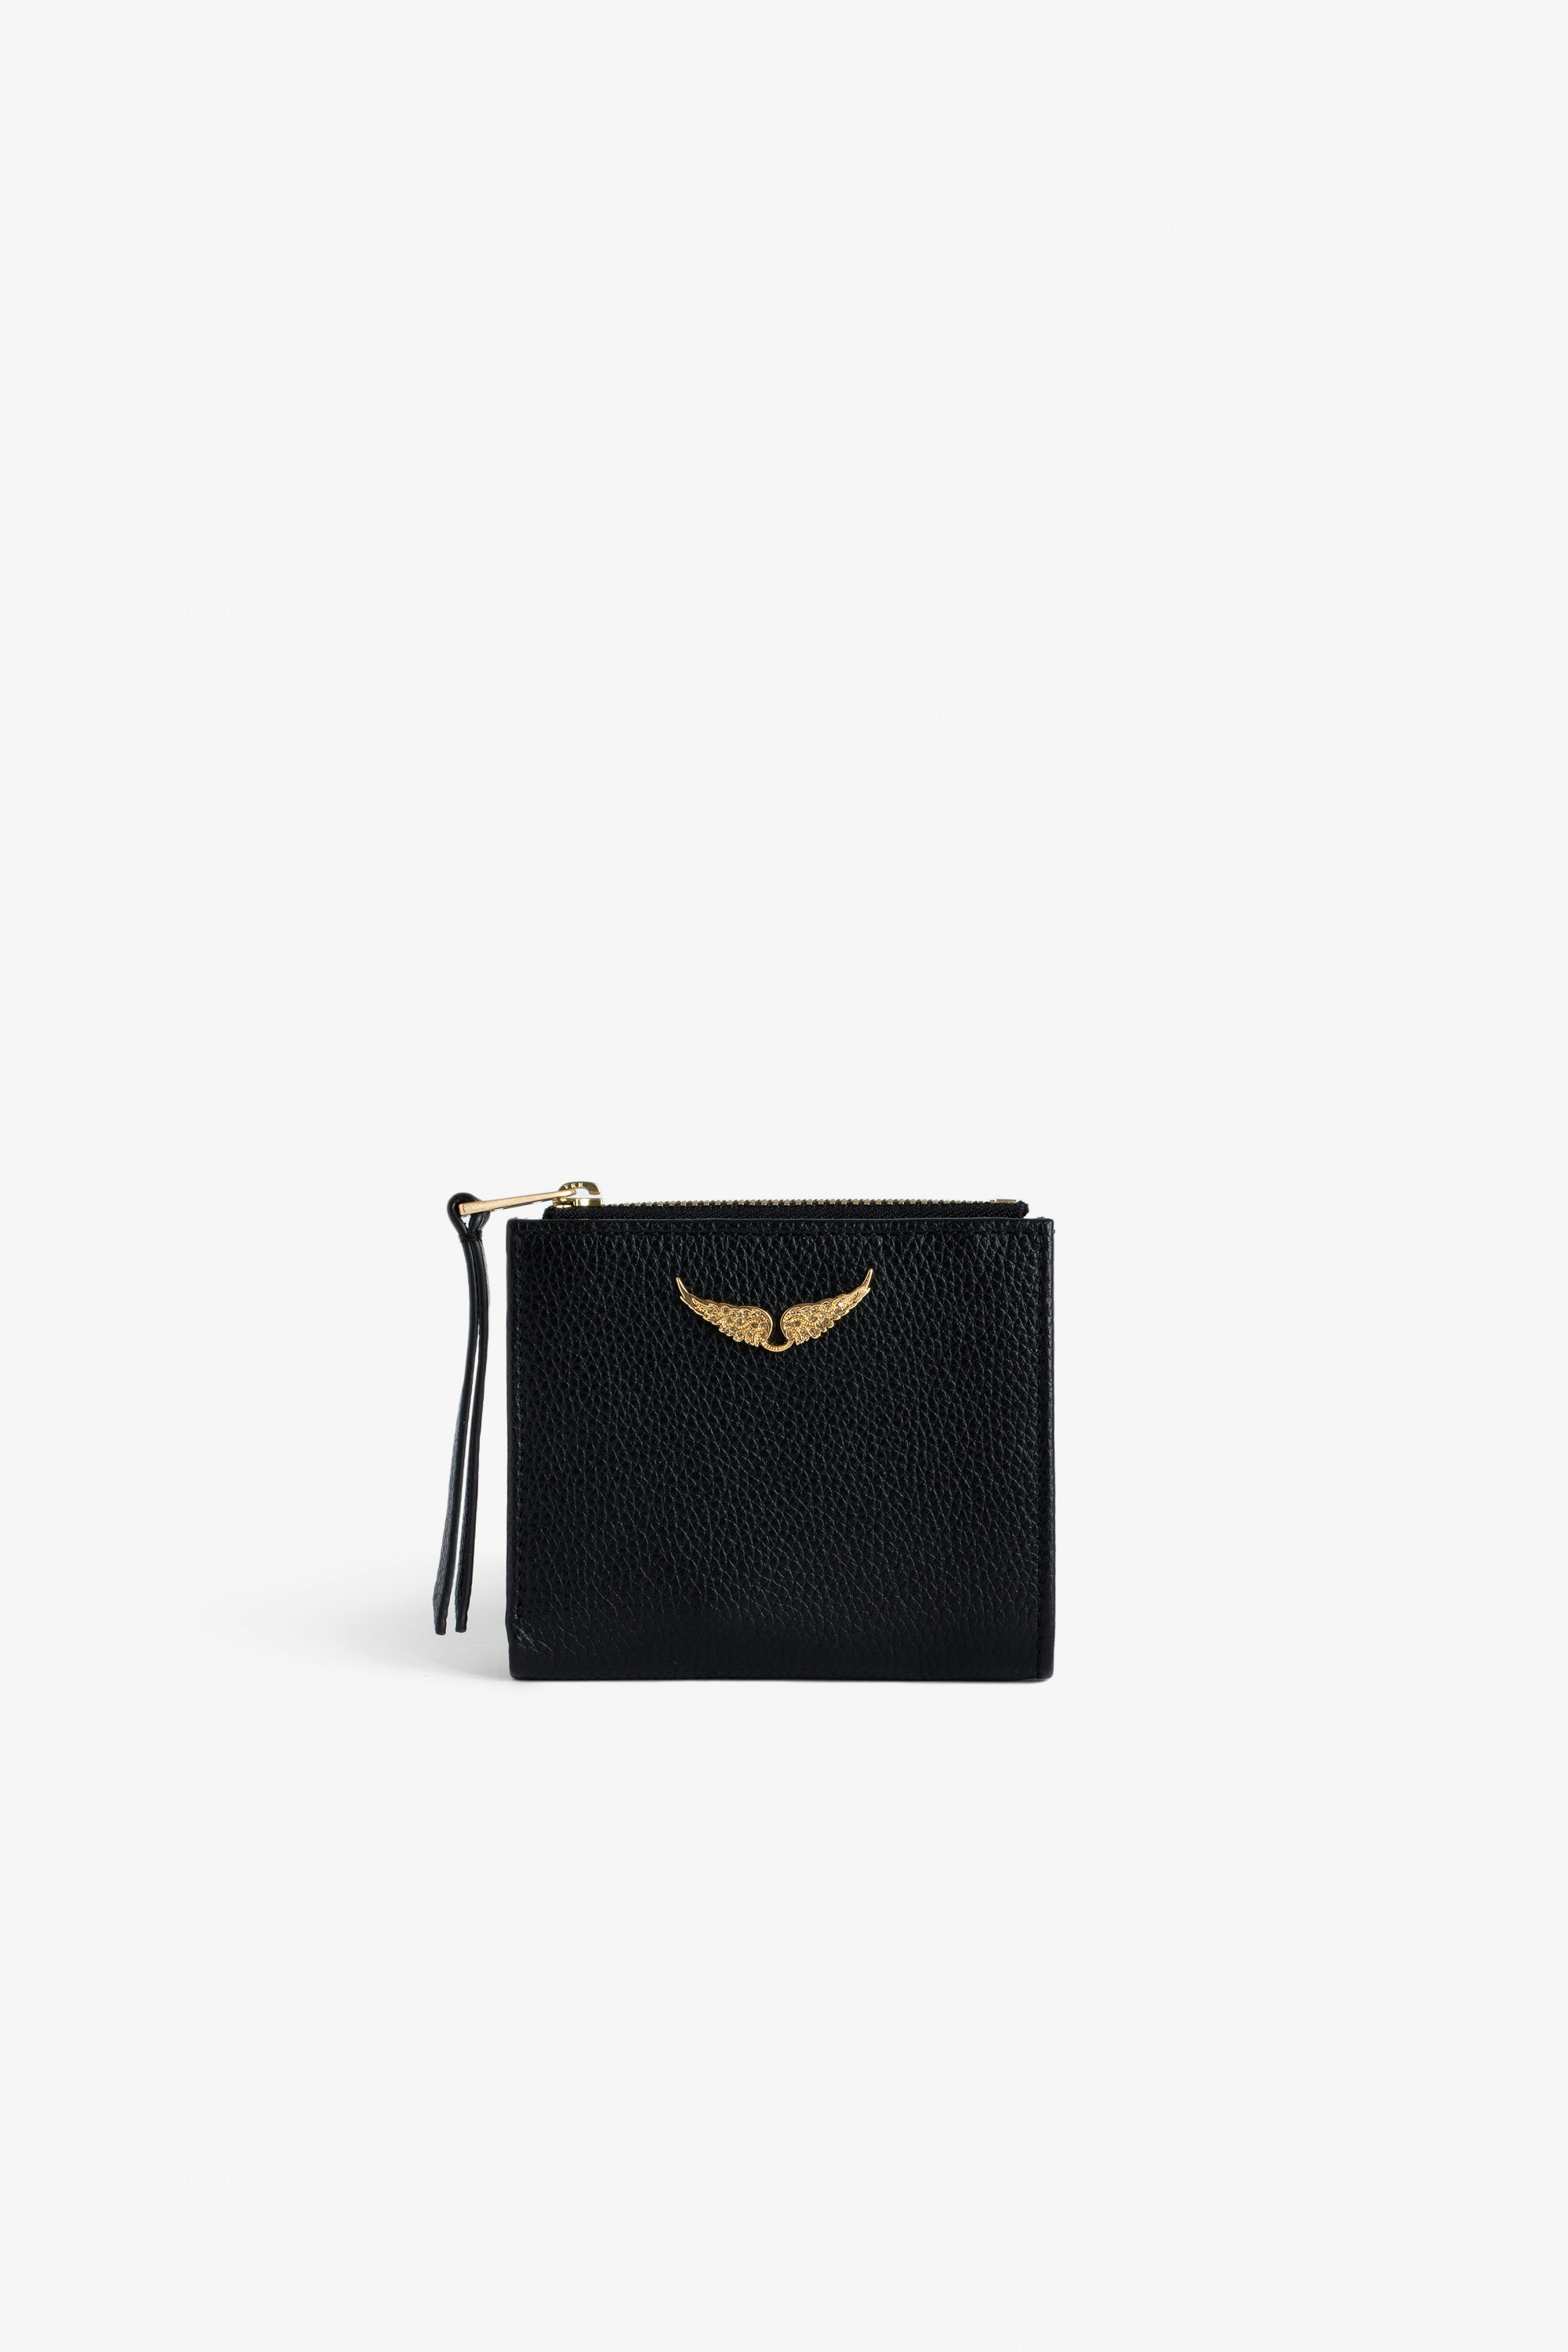 ZV Fold Coin Purse - Women’s black grained leather coin purse with gold-tone diamanté wings charm.